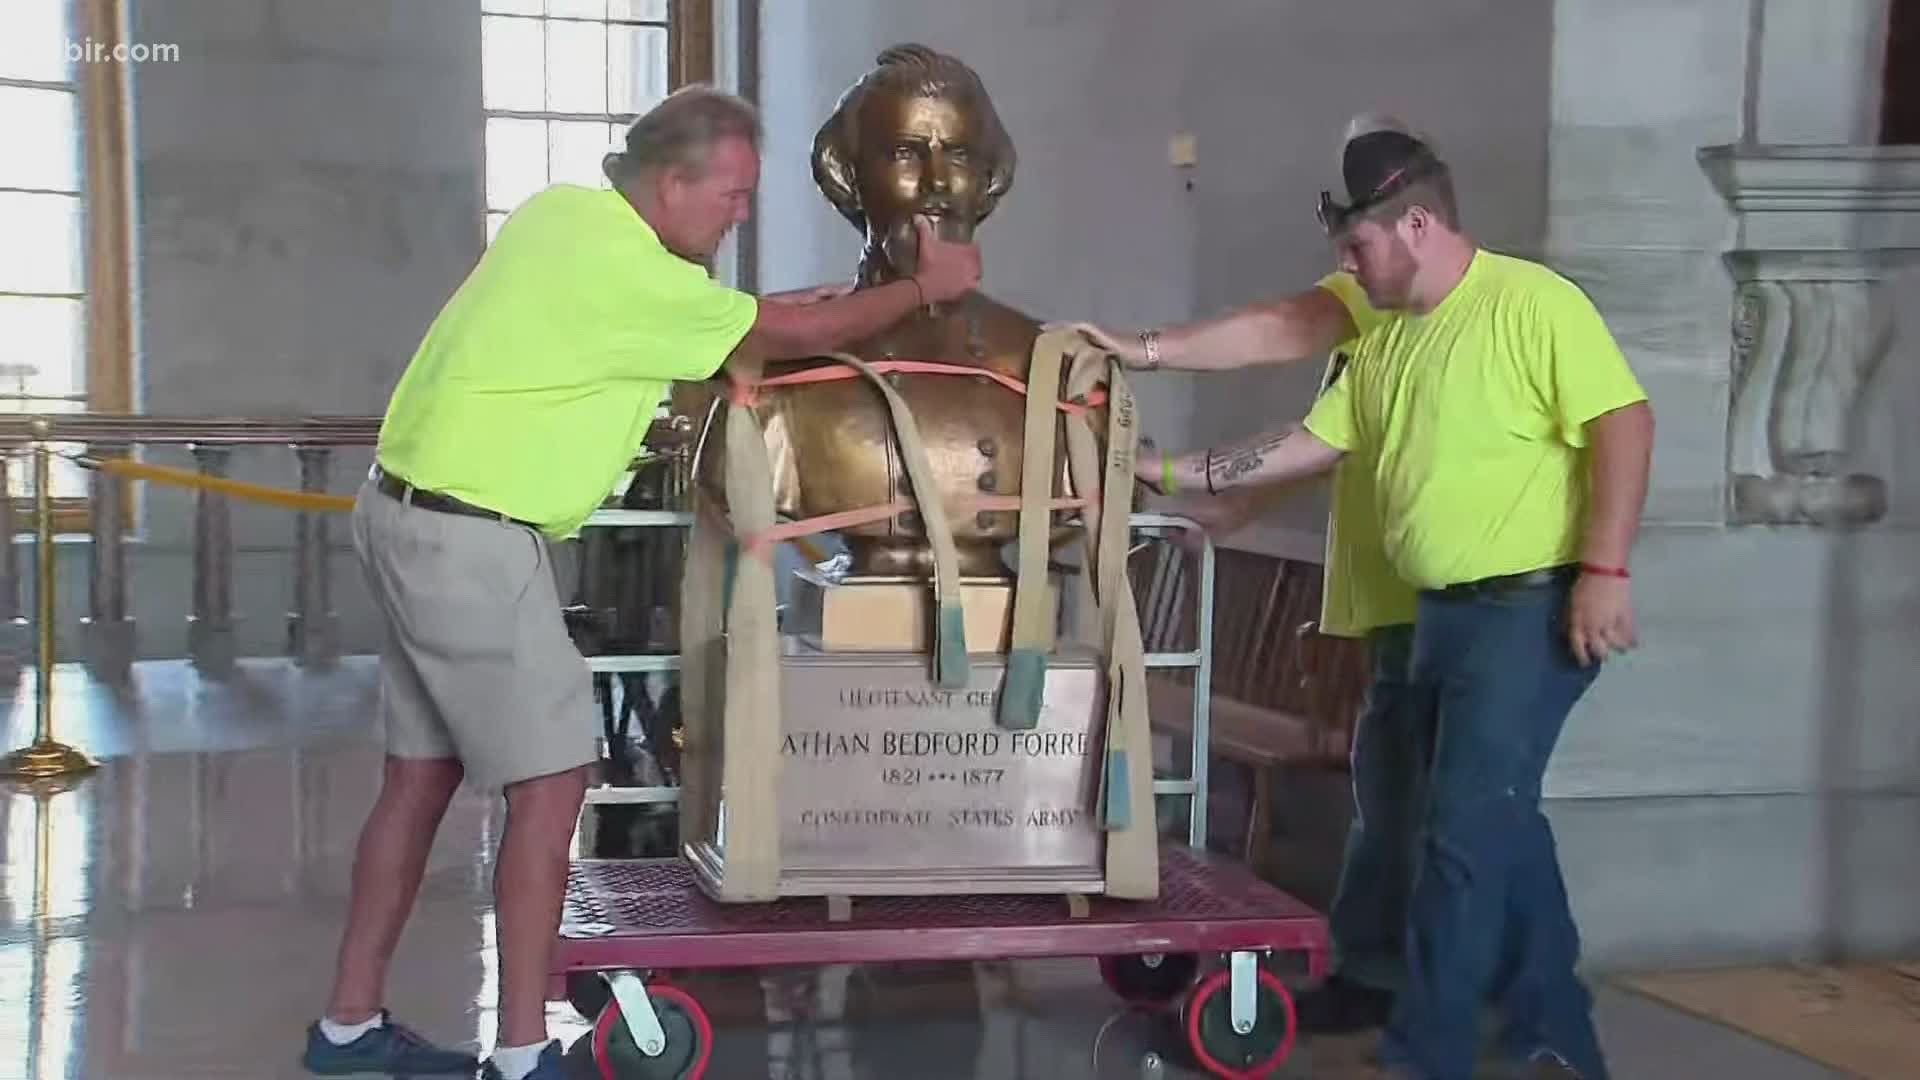 The bust of Confederate general and early KKK leader Nathan Bedford Forrest is now on display at its new spot inside the Tennessee State Museum